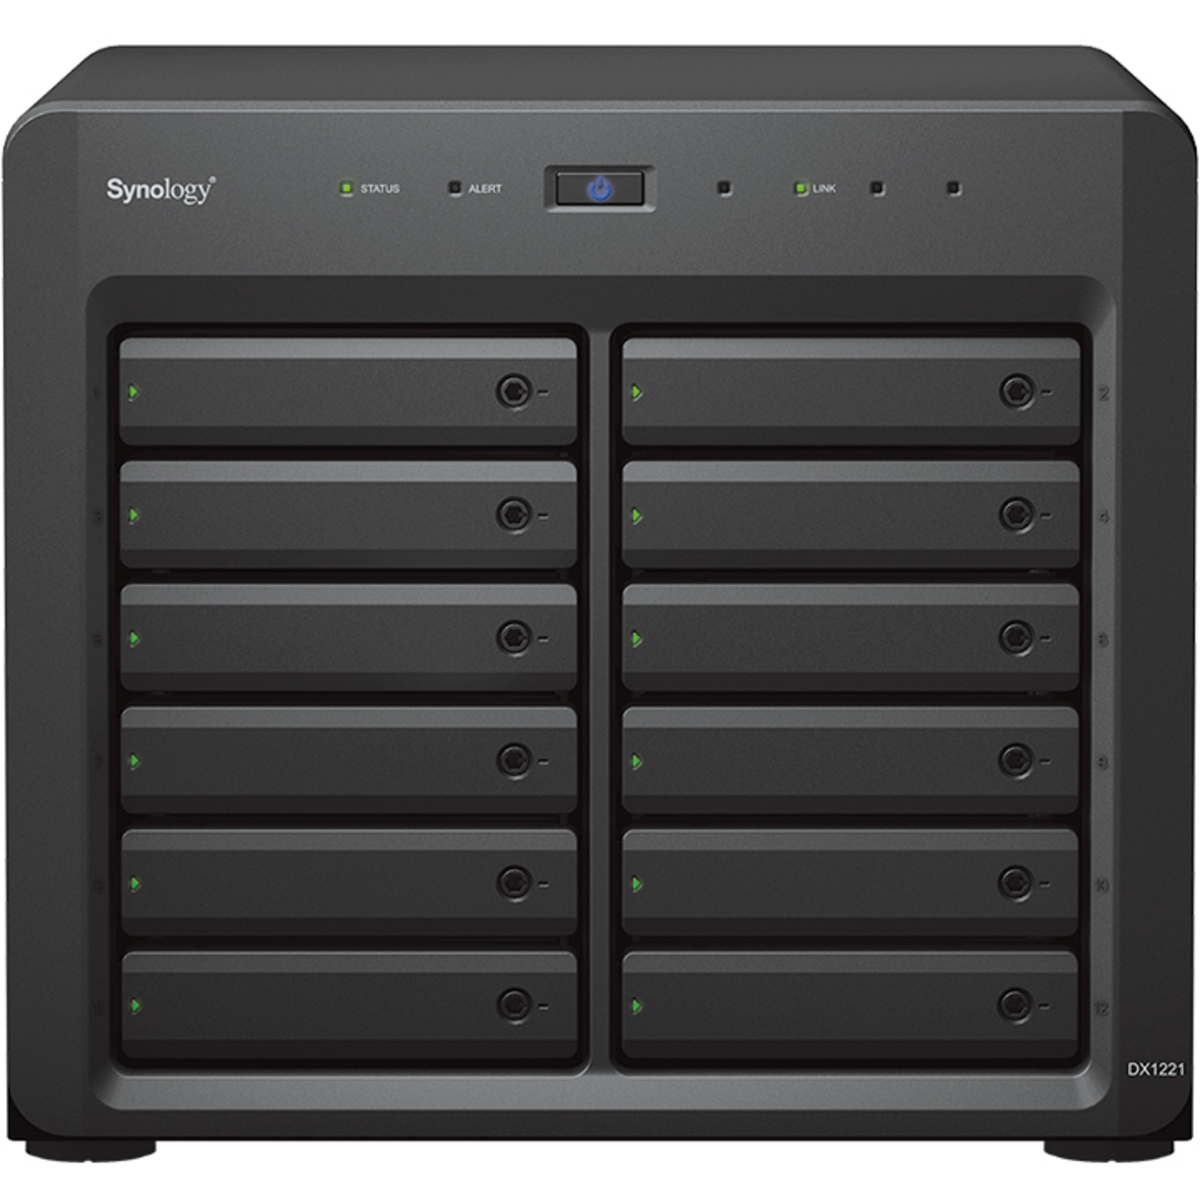 Synology DX1222 External Expansion Drive 24tb 12-Bay Desktop Multimedia / Power User / Business Expansion Enclosure 12x2tb Western Digital Red SA500 WDS200T1R0A 2.5 560/530MB/s SATA 6Gb/s SSD NAS Class Drives Installed - Burn-In Tested DX1222 External Expansion Drive